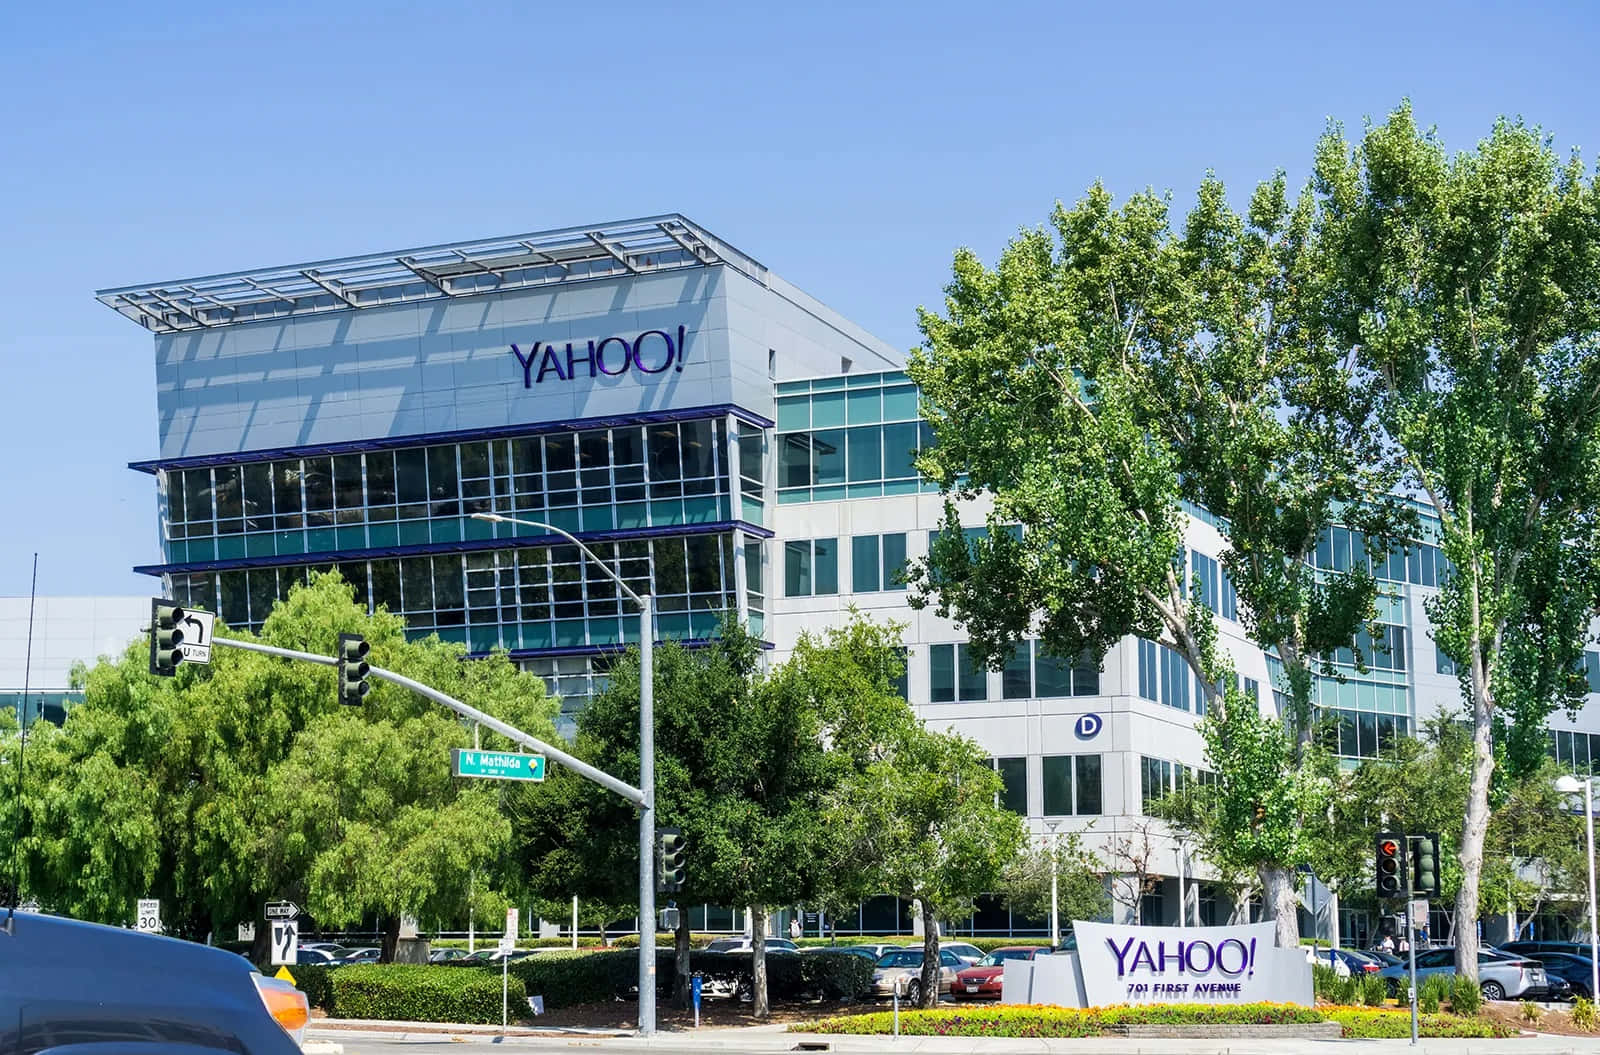 A Car Is Driving Past A Large Building With A Yahoo Sign